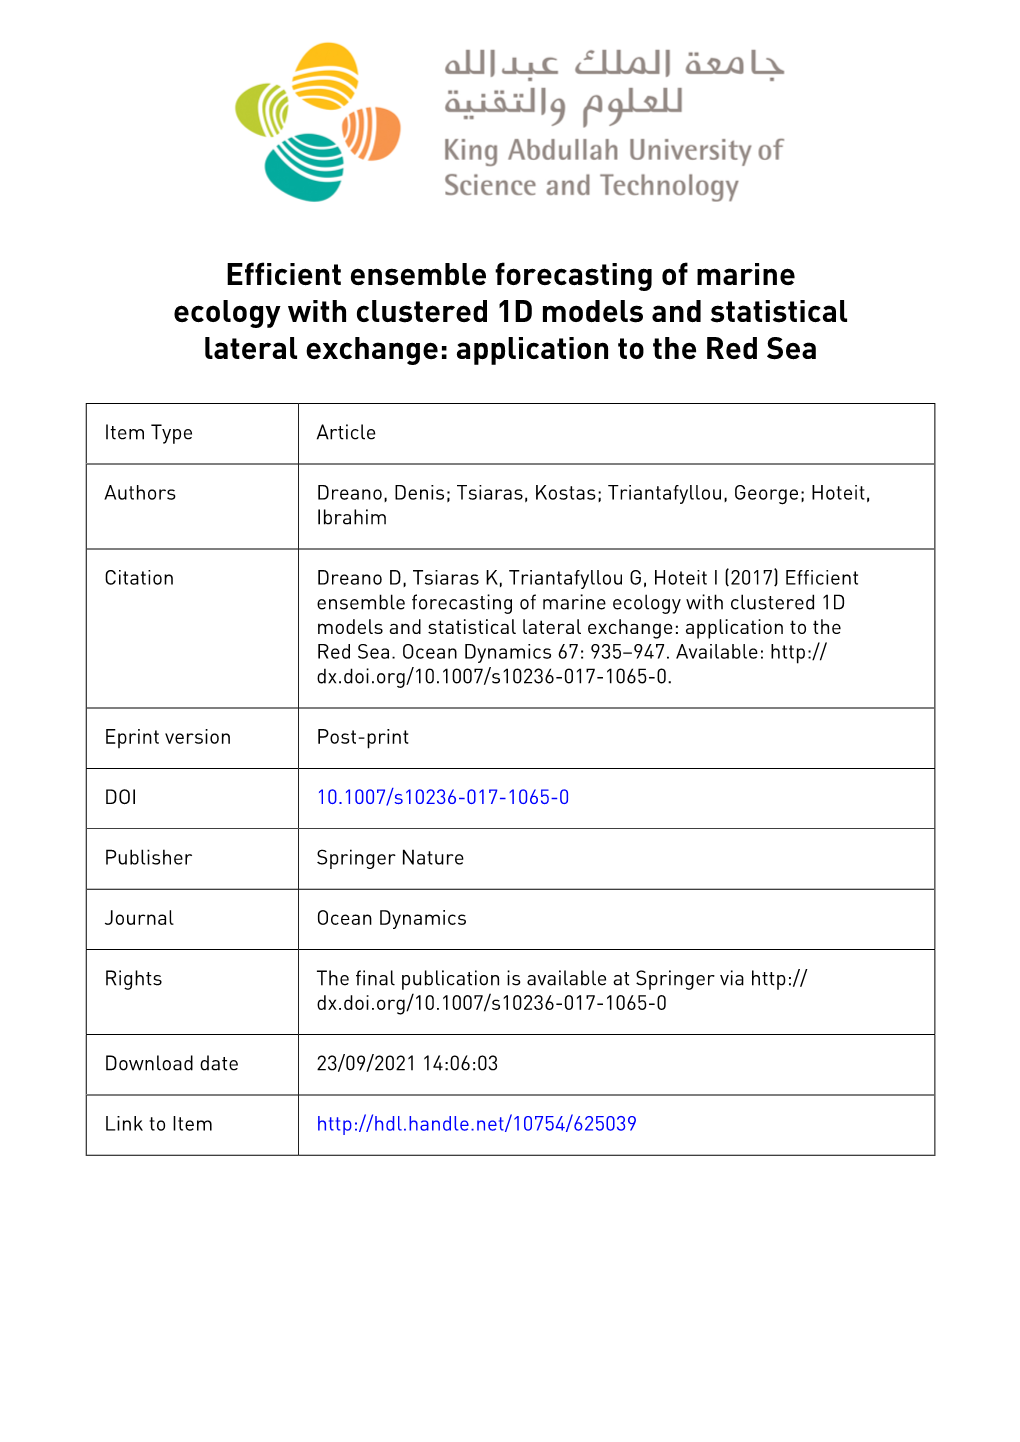 Efficient Ensemble Forecasting of Marine Ecology with Clustered 1D Models and Statistical Lateral Exchange: Application to the Red Sea